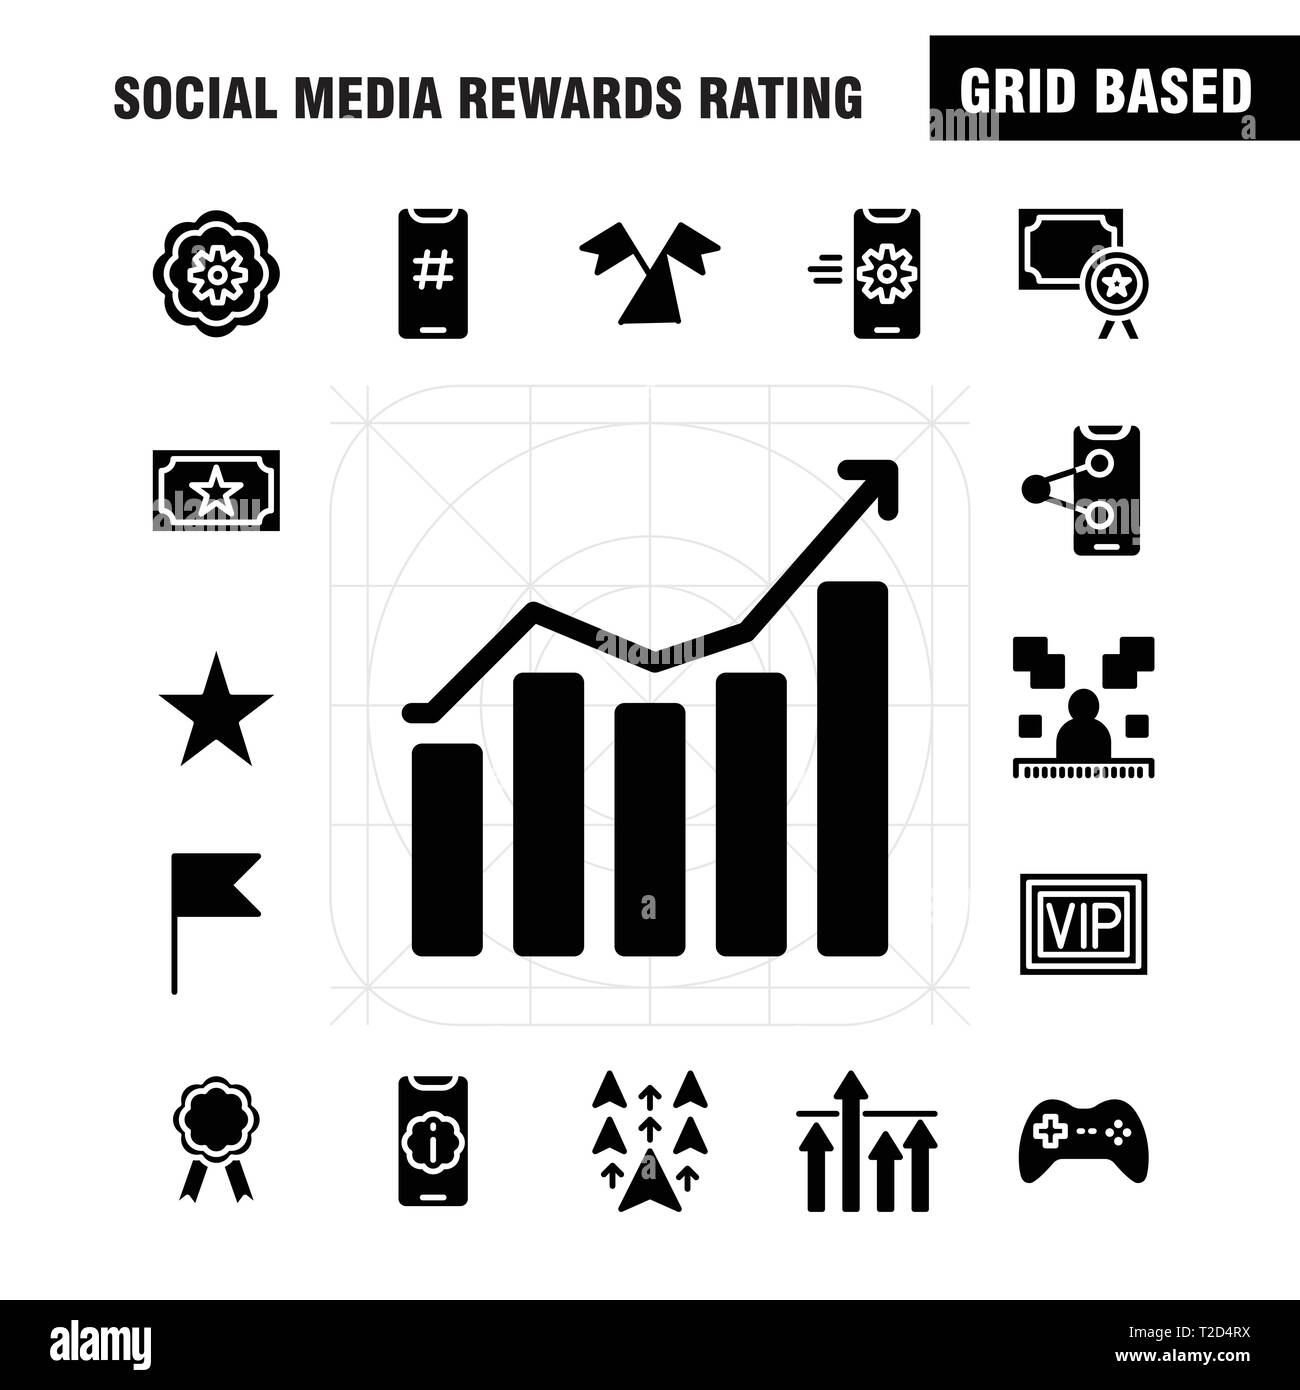 Social Media Rewards Rating Solid Glyph Icon Pack For Designers And Developers. Icons Of Cinema, Movie, Ticket, Rating, Gear, Settings, Social Media,  Stock Vector